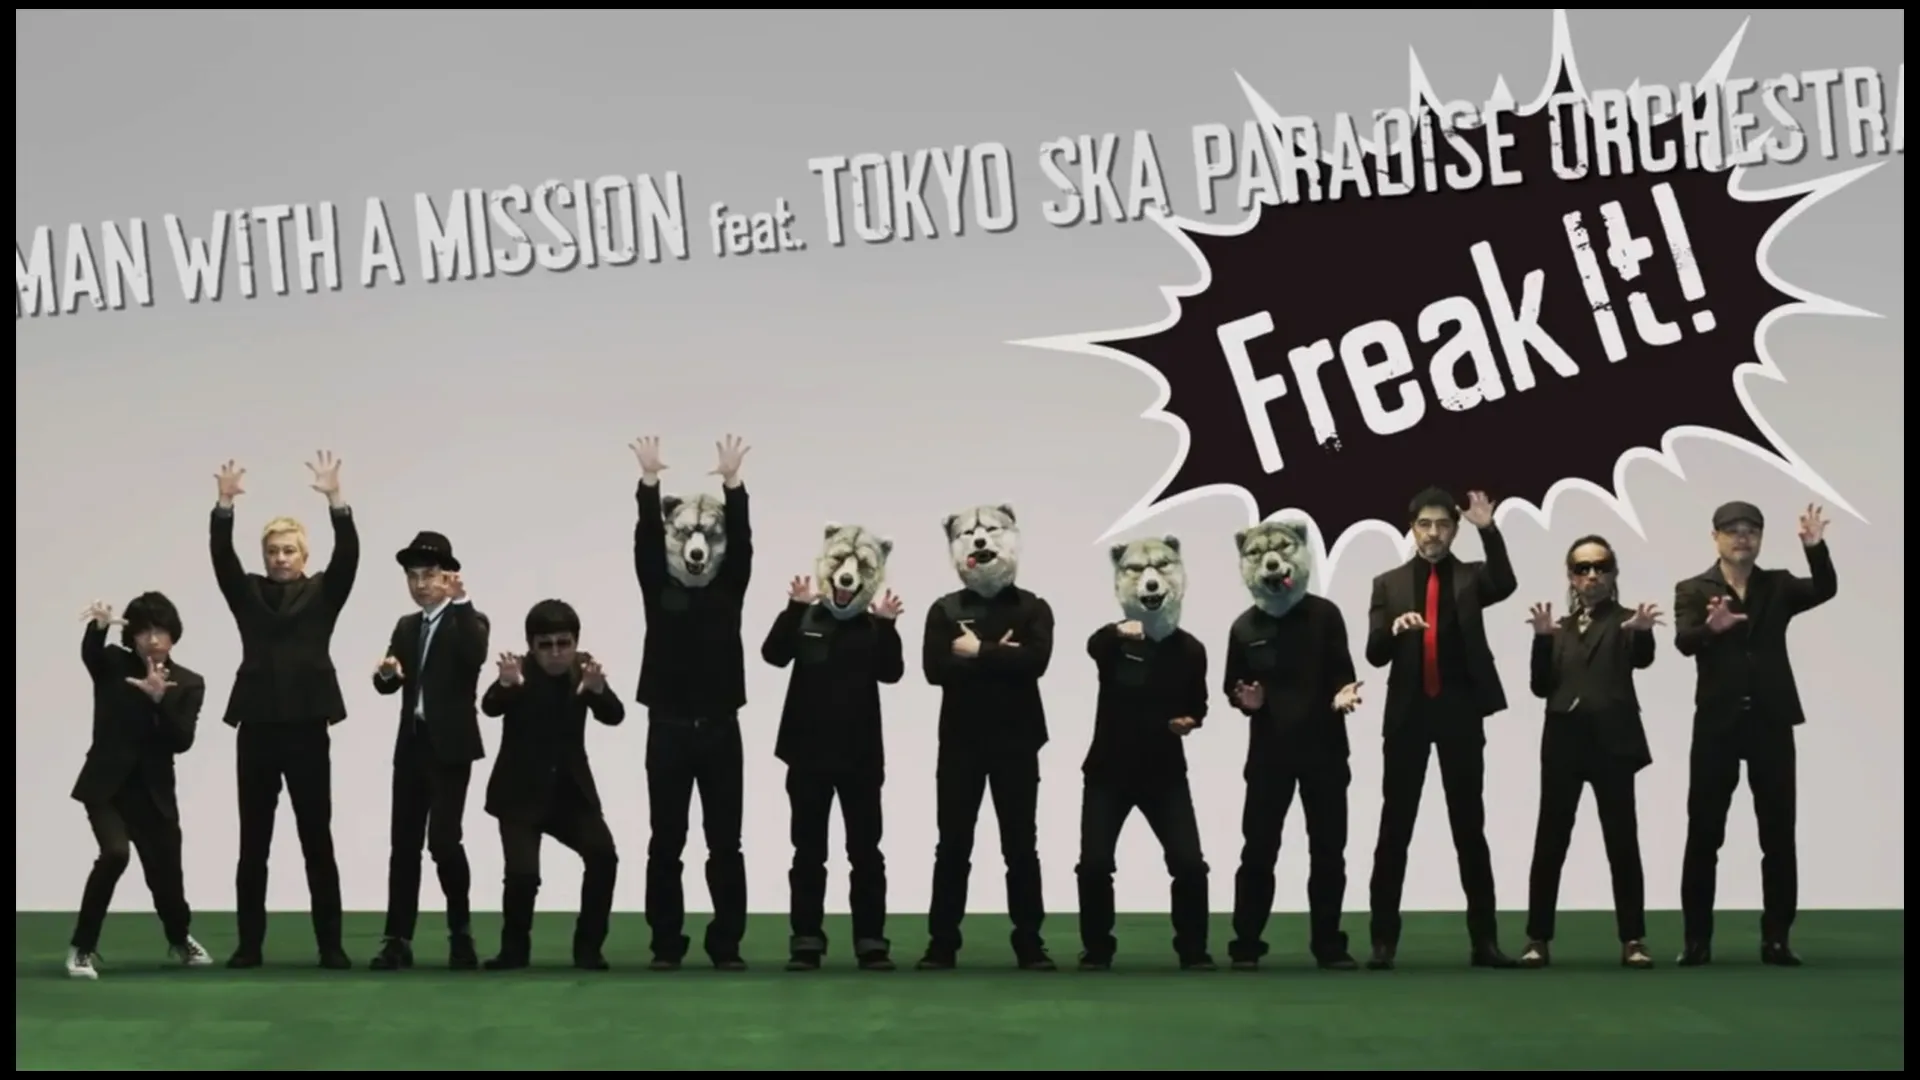 MAN WITH A MISSION「Freak It! feat. TOKYO SKA PARADISE ORCHESTRA」